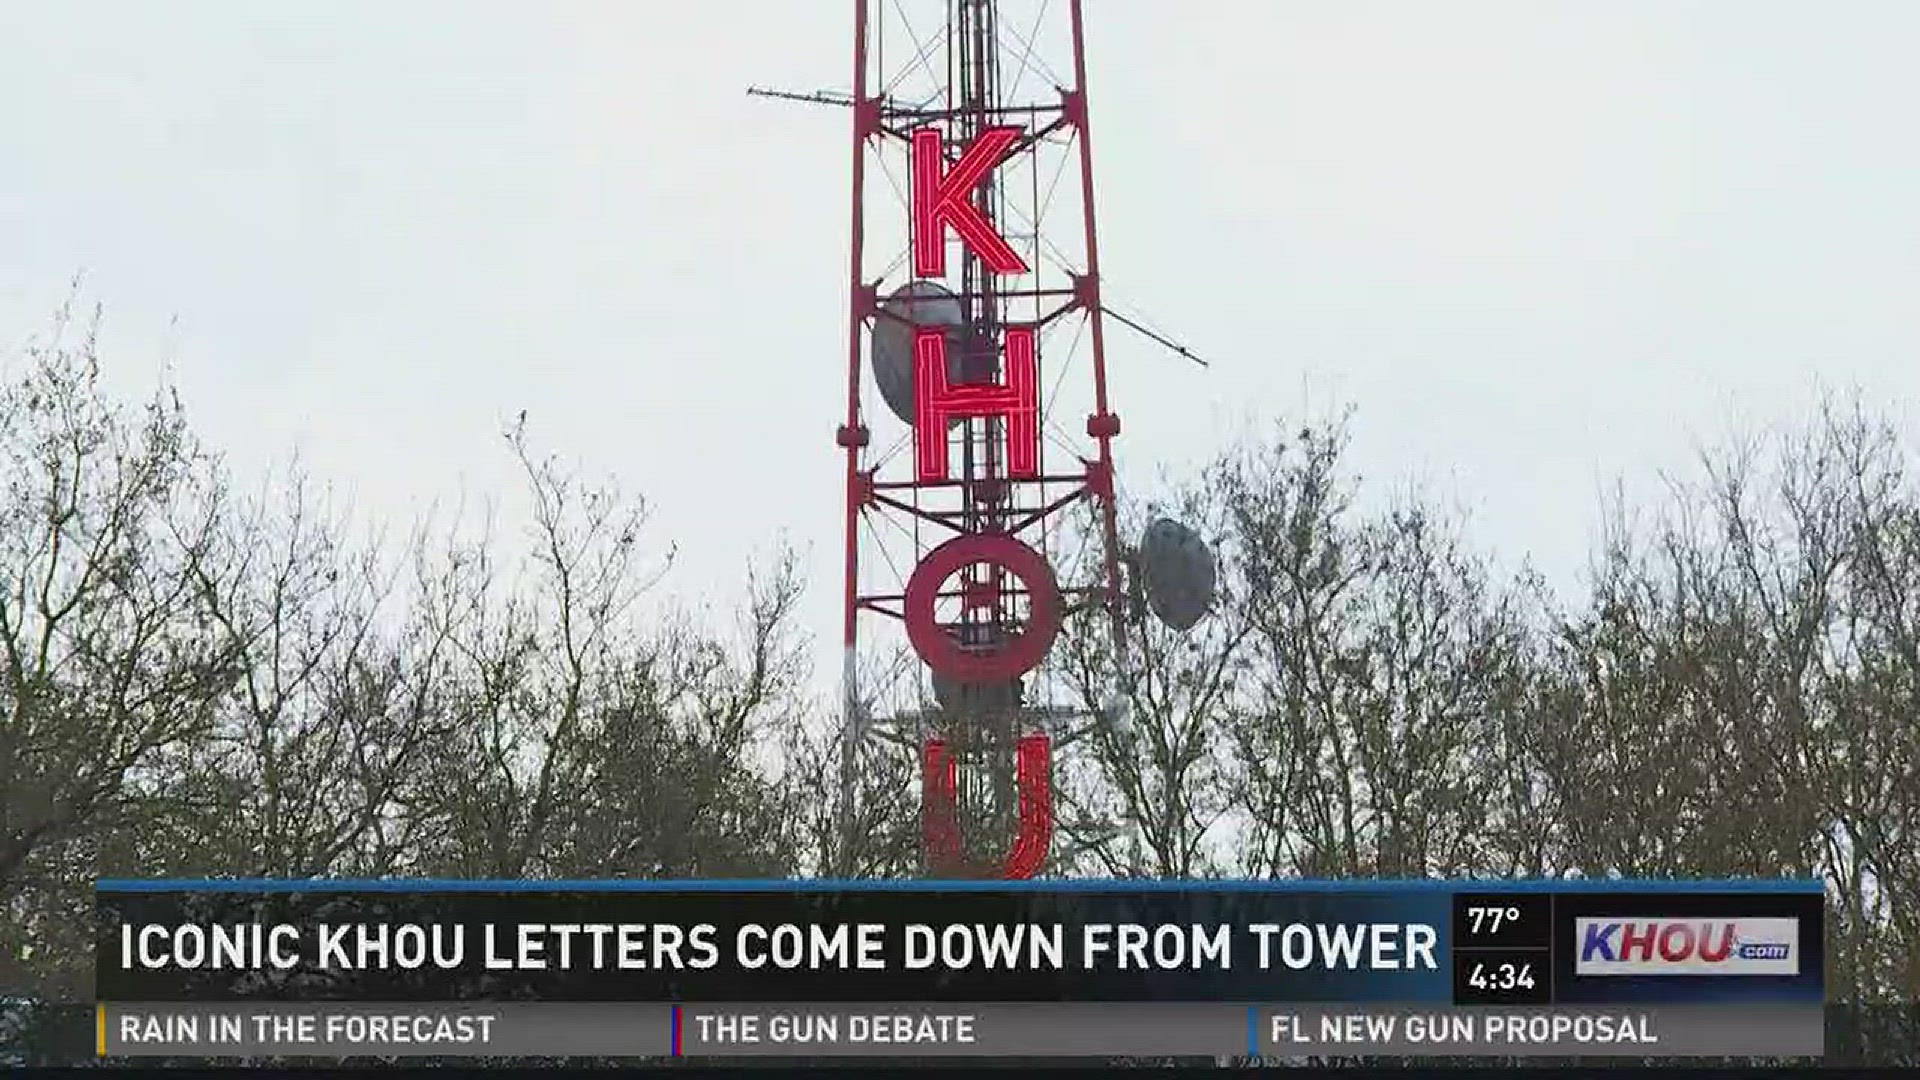 Friday was moving day for the iconic KHOU letters on the tower over 1945 Allen Parkway, as one chapter in our history came to a close. "It's a heartbreaking day, and it's a big day," said Susan McEldoon, KHOU 11 General Manager.  "Those letters, that hav